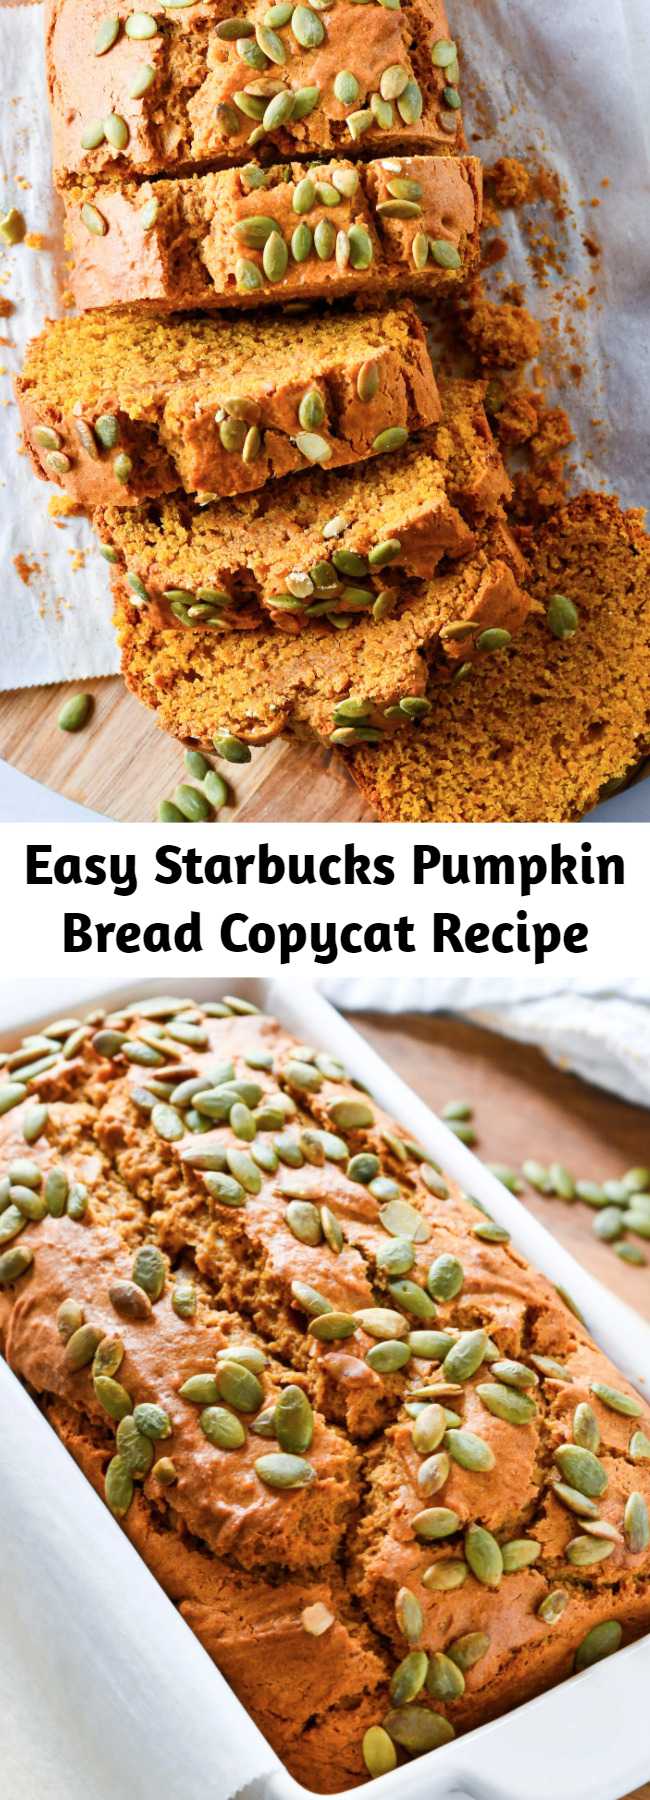 Easy Starbucks Pumpkin Bread Copycat Recipe - Thick moist slices of pumpkin bread that perfectly mimic everyone's favorite loaf at Starbucks. You'll love this homemade copycat recipe even more than the real thing!